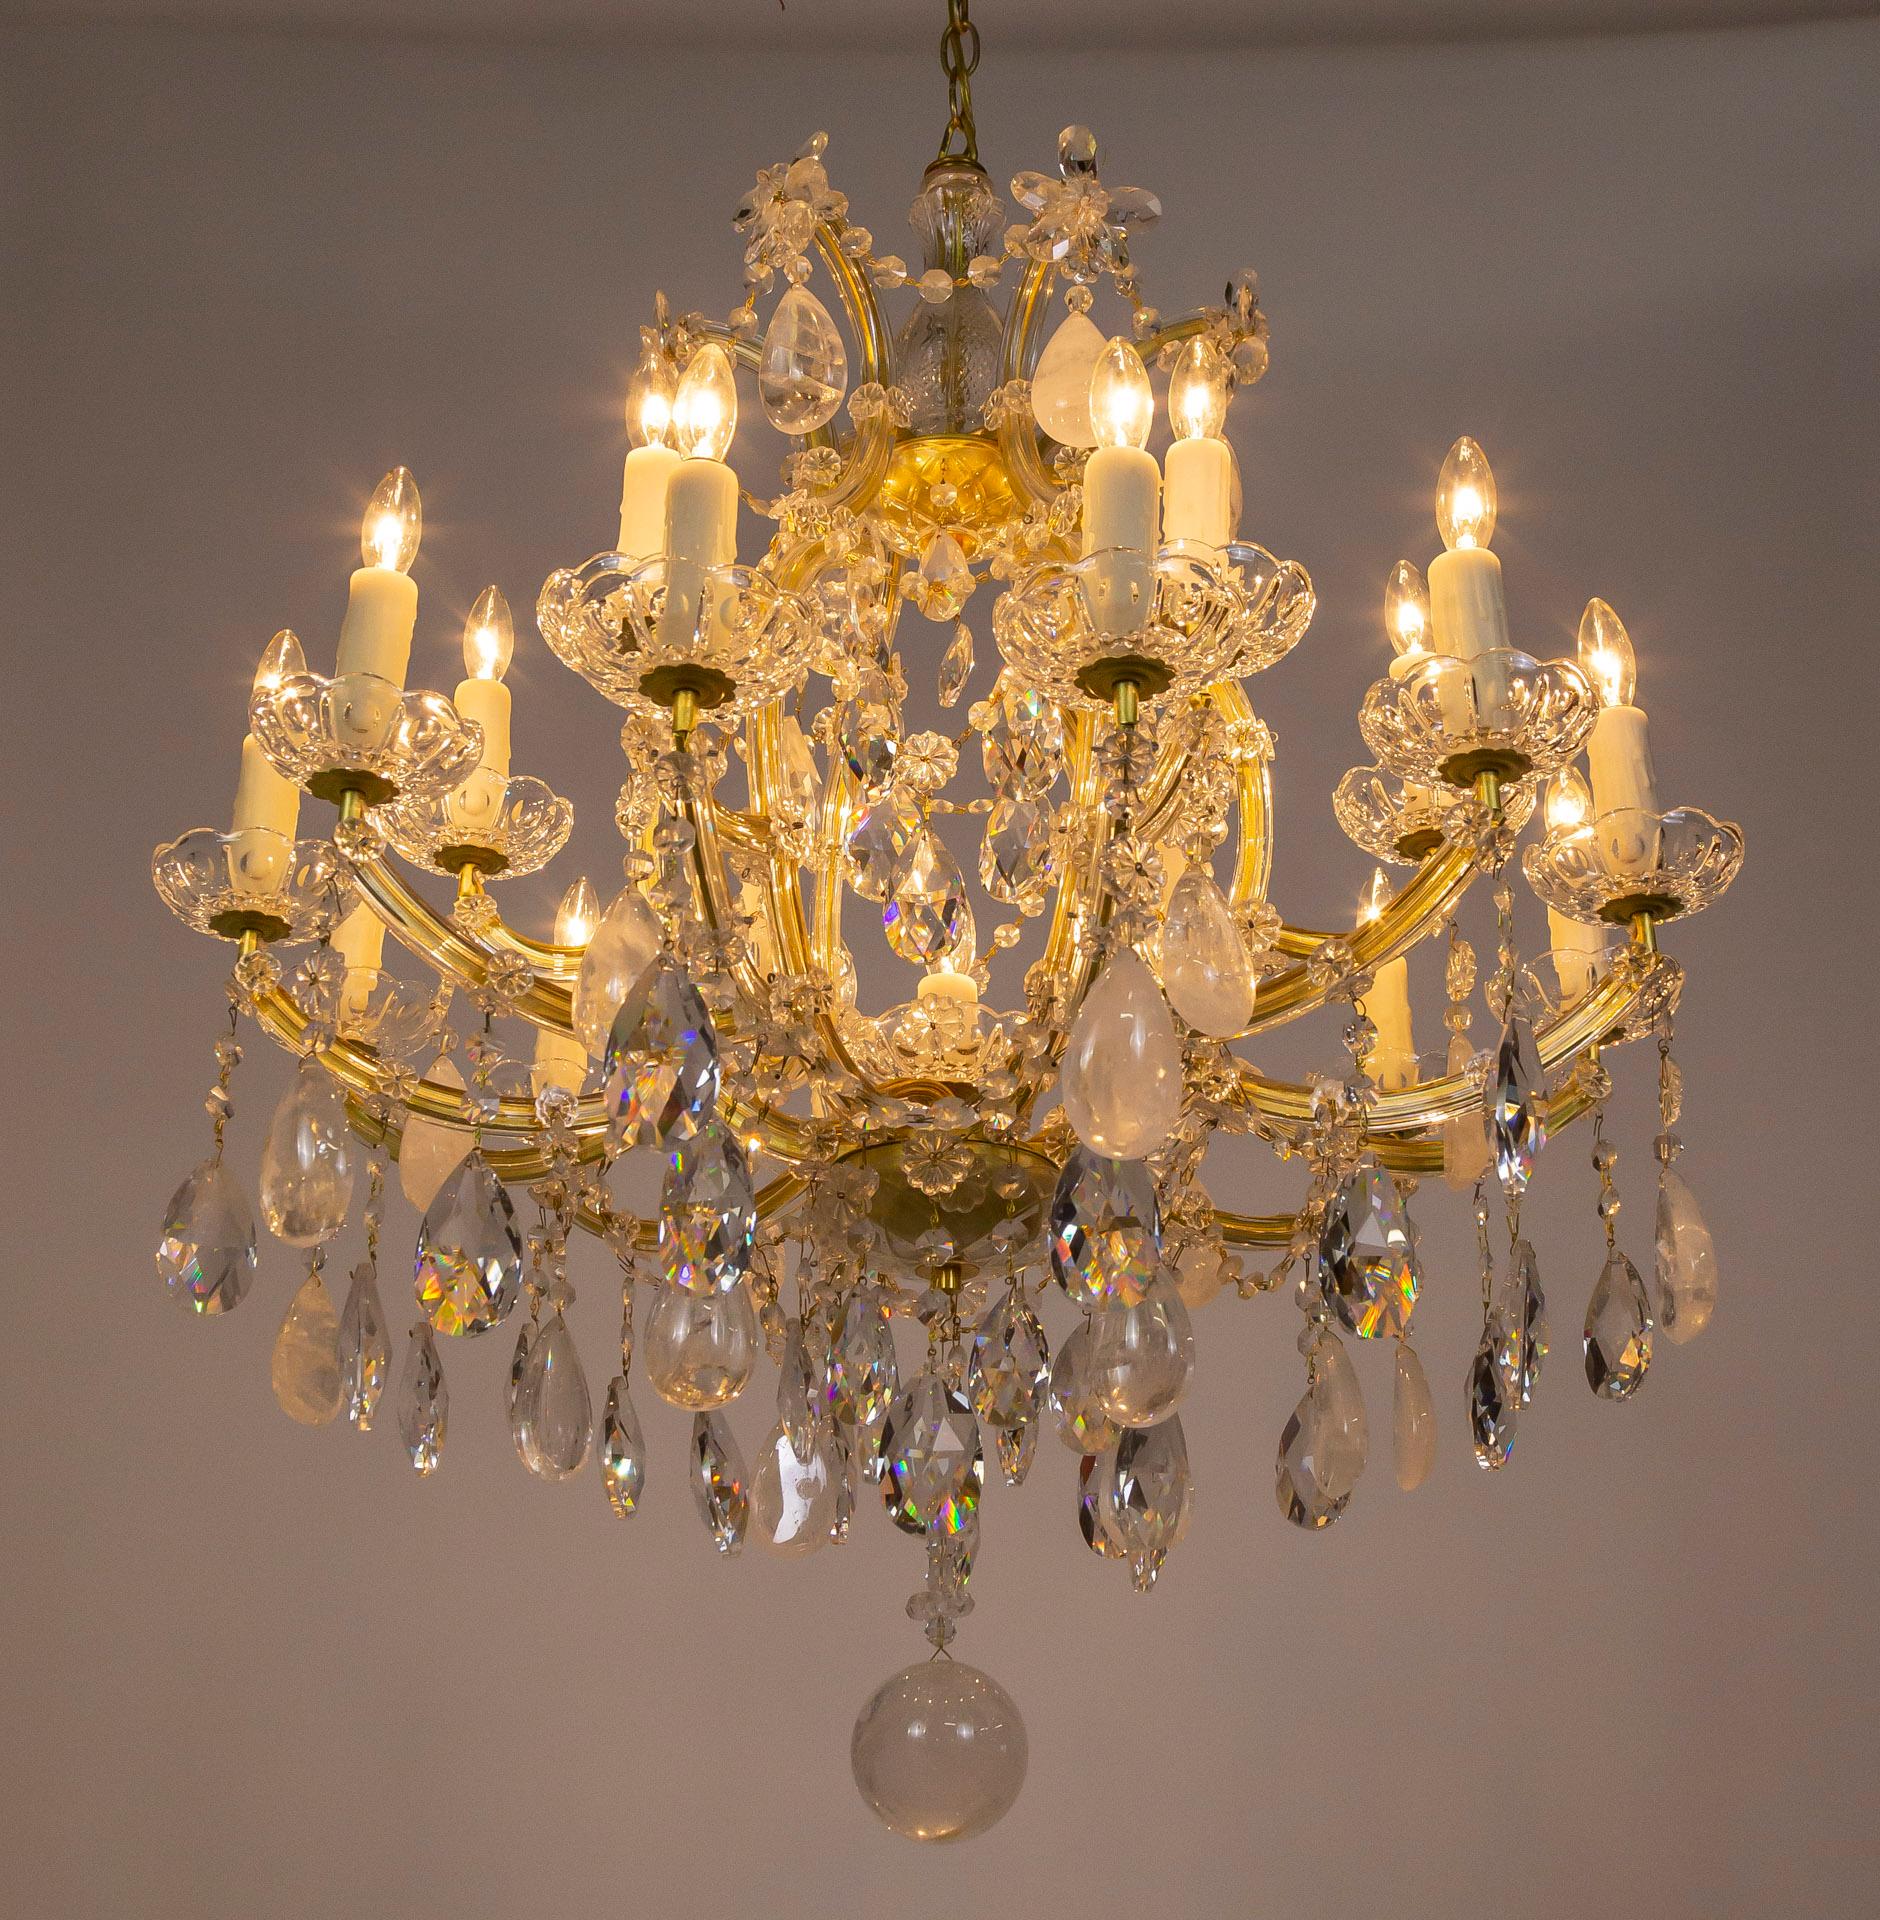 19-Light Rock Crystal Maria Theresa Chandelier For Sale 6